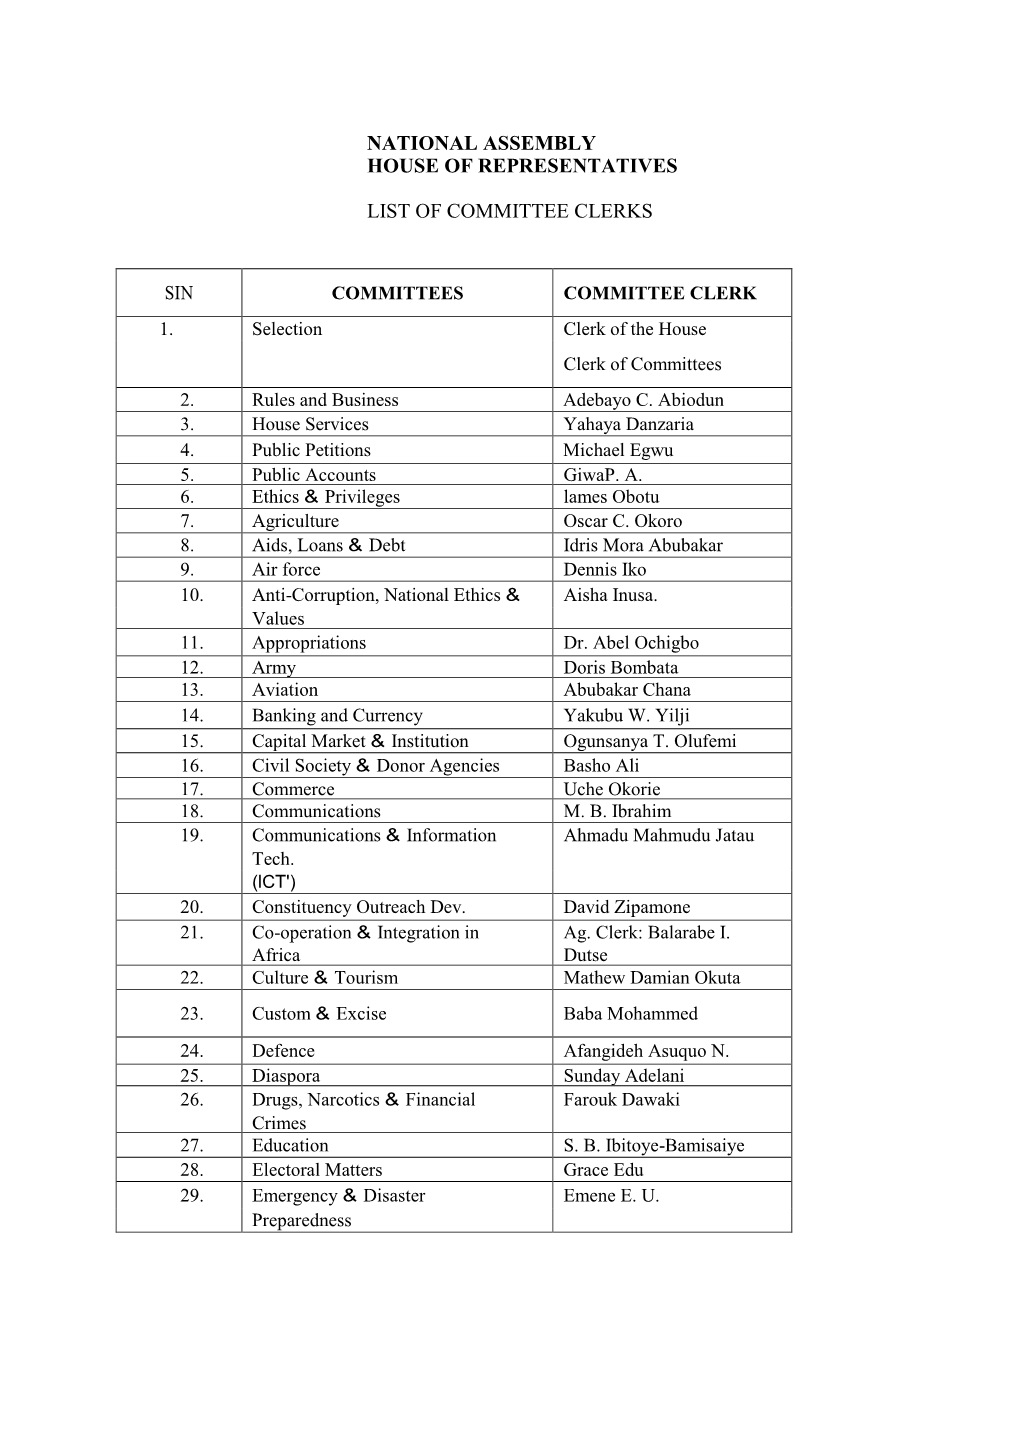 National Assembly House of Representatives List of Committee Clerks